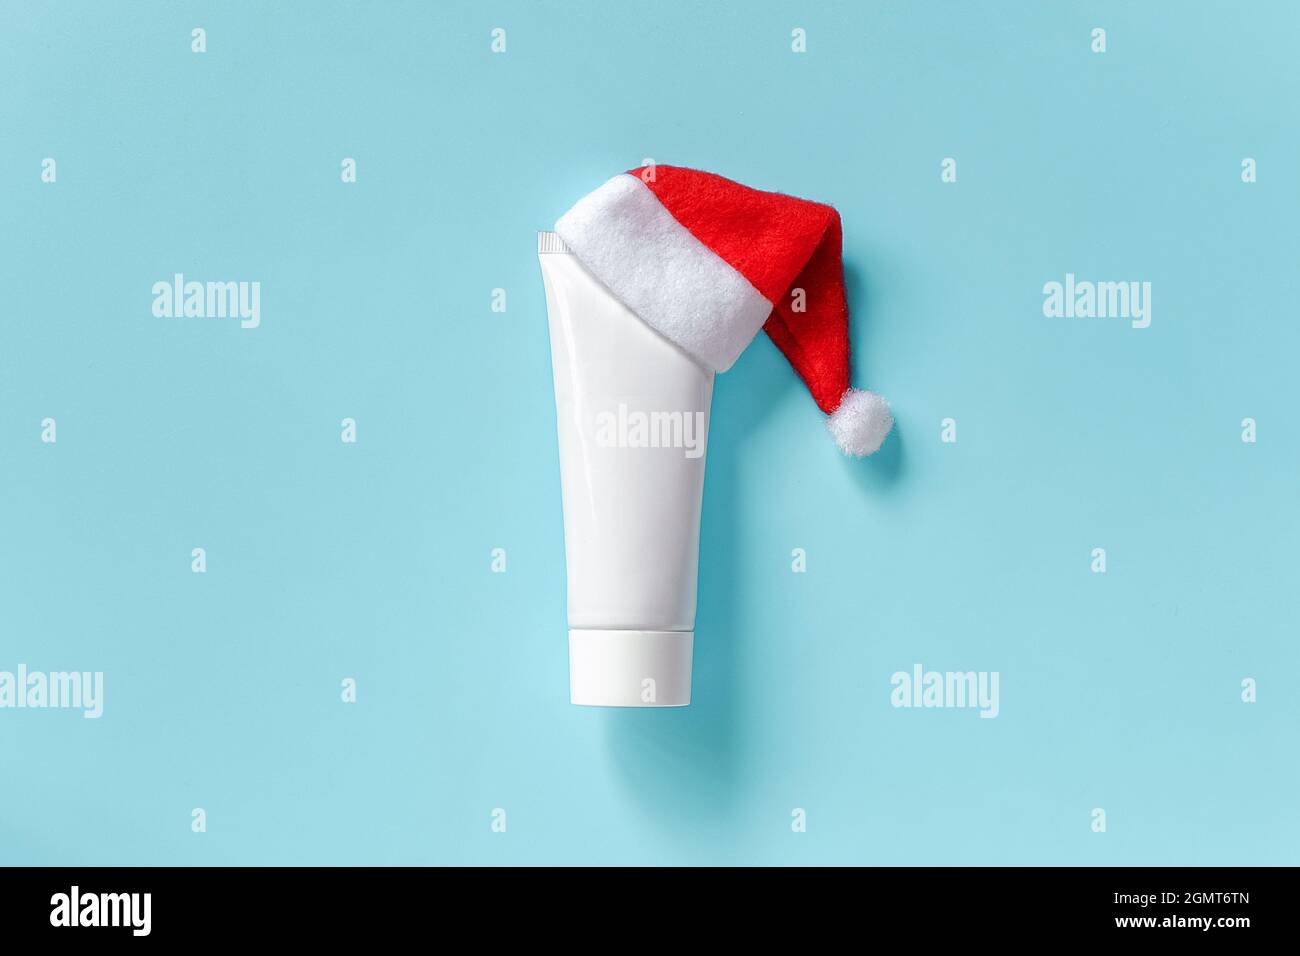 Cosmetic, medical white tube for cream, ointment or other product in red Santa Claus hat on blue background. Concept winter skin and body care or xmas Stock Photo